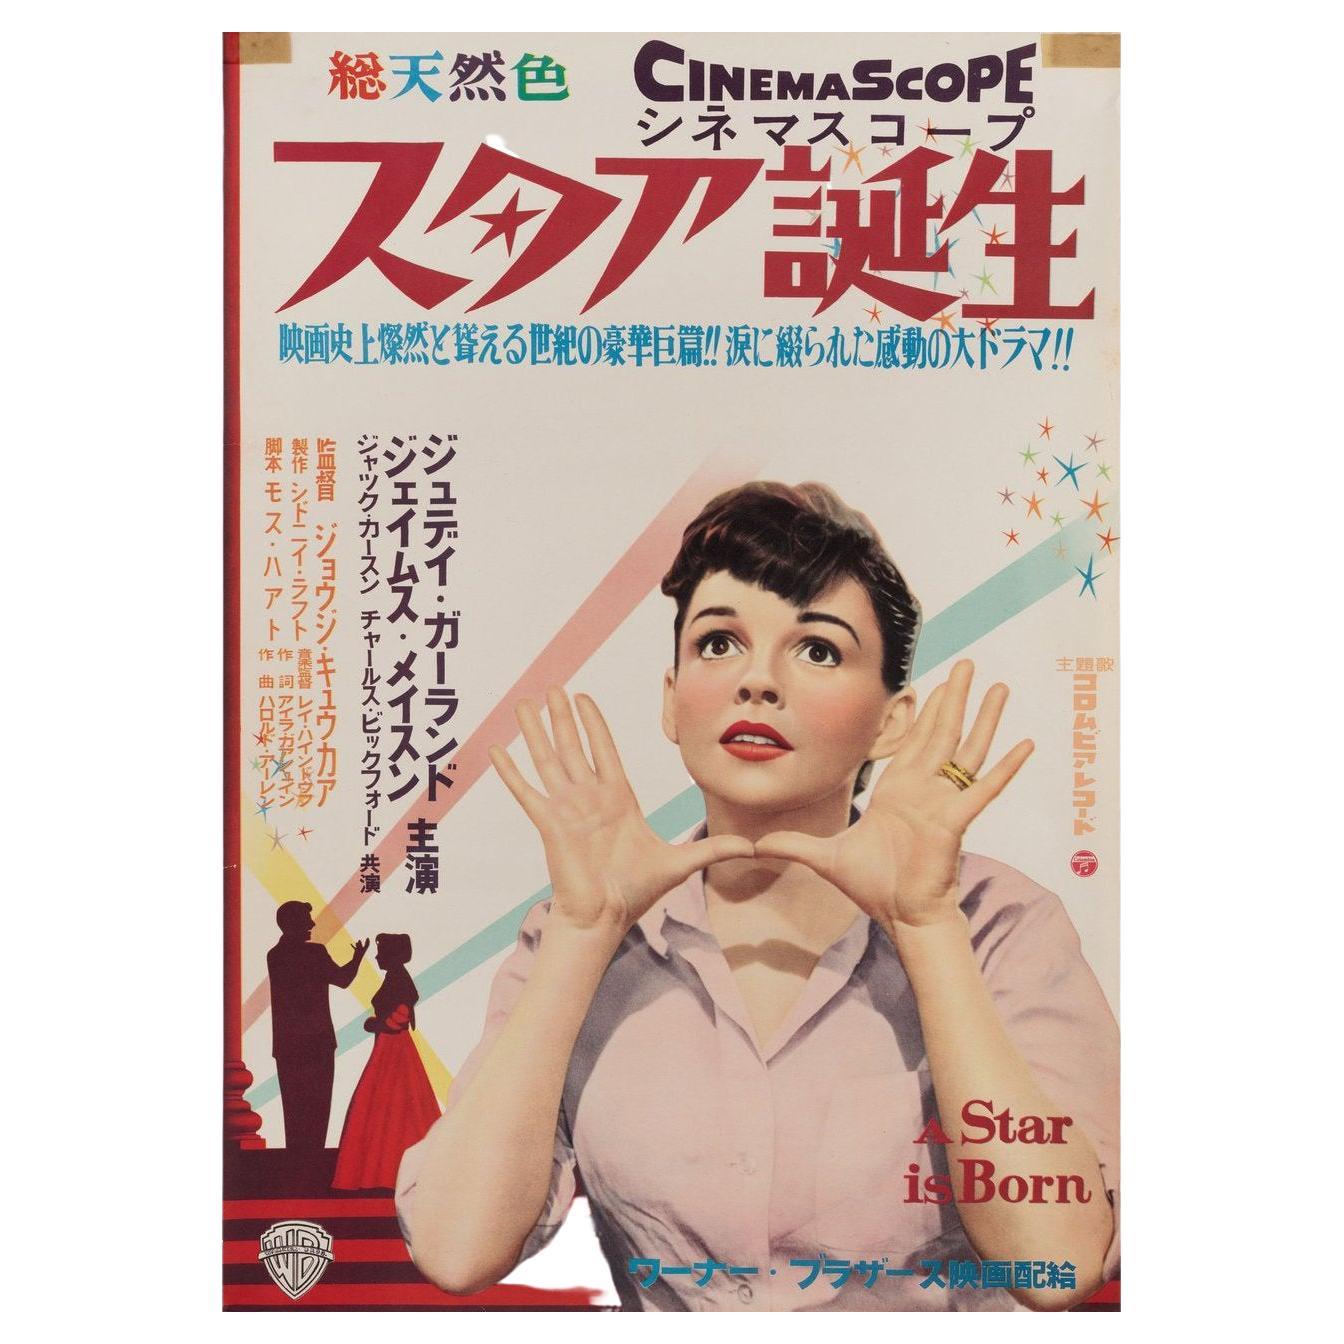 A Star Is Born 1954 Japanese B2 Film Poster For Sale